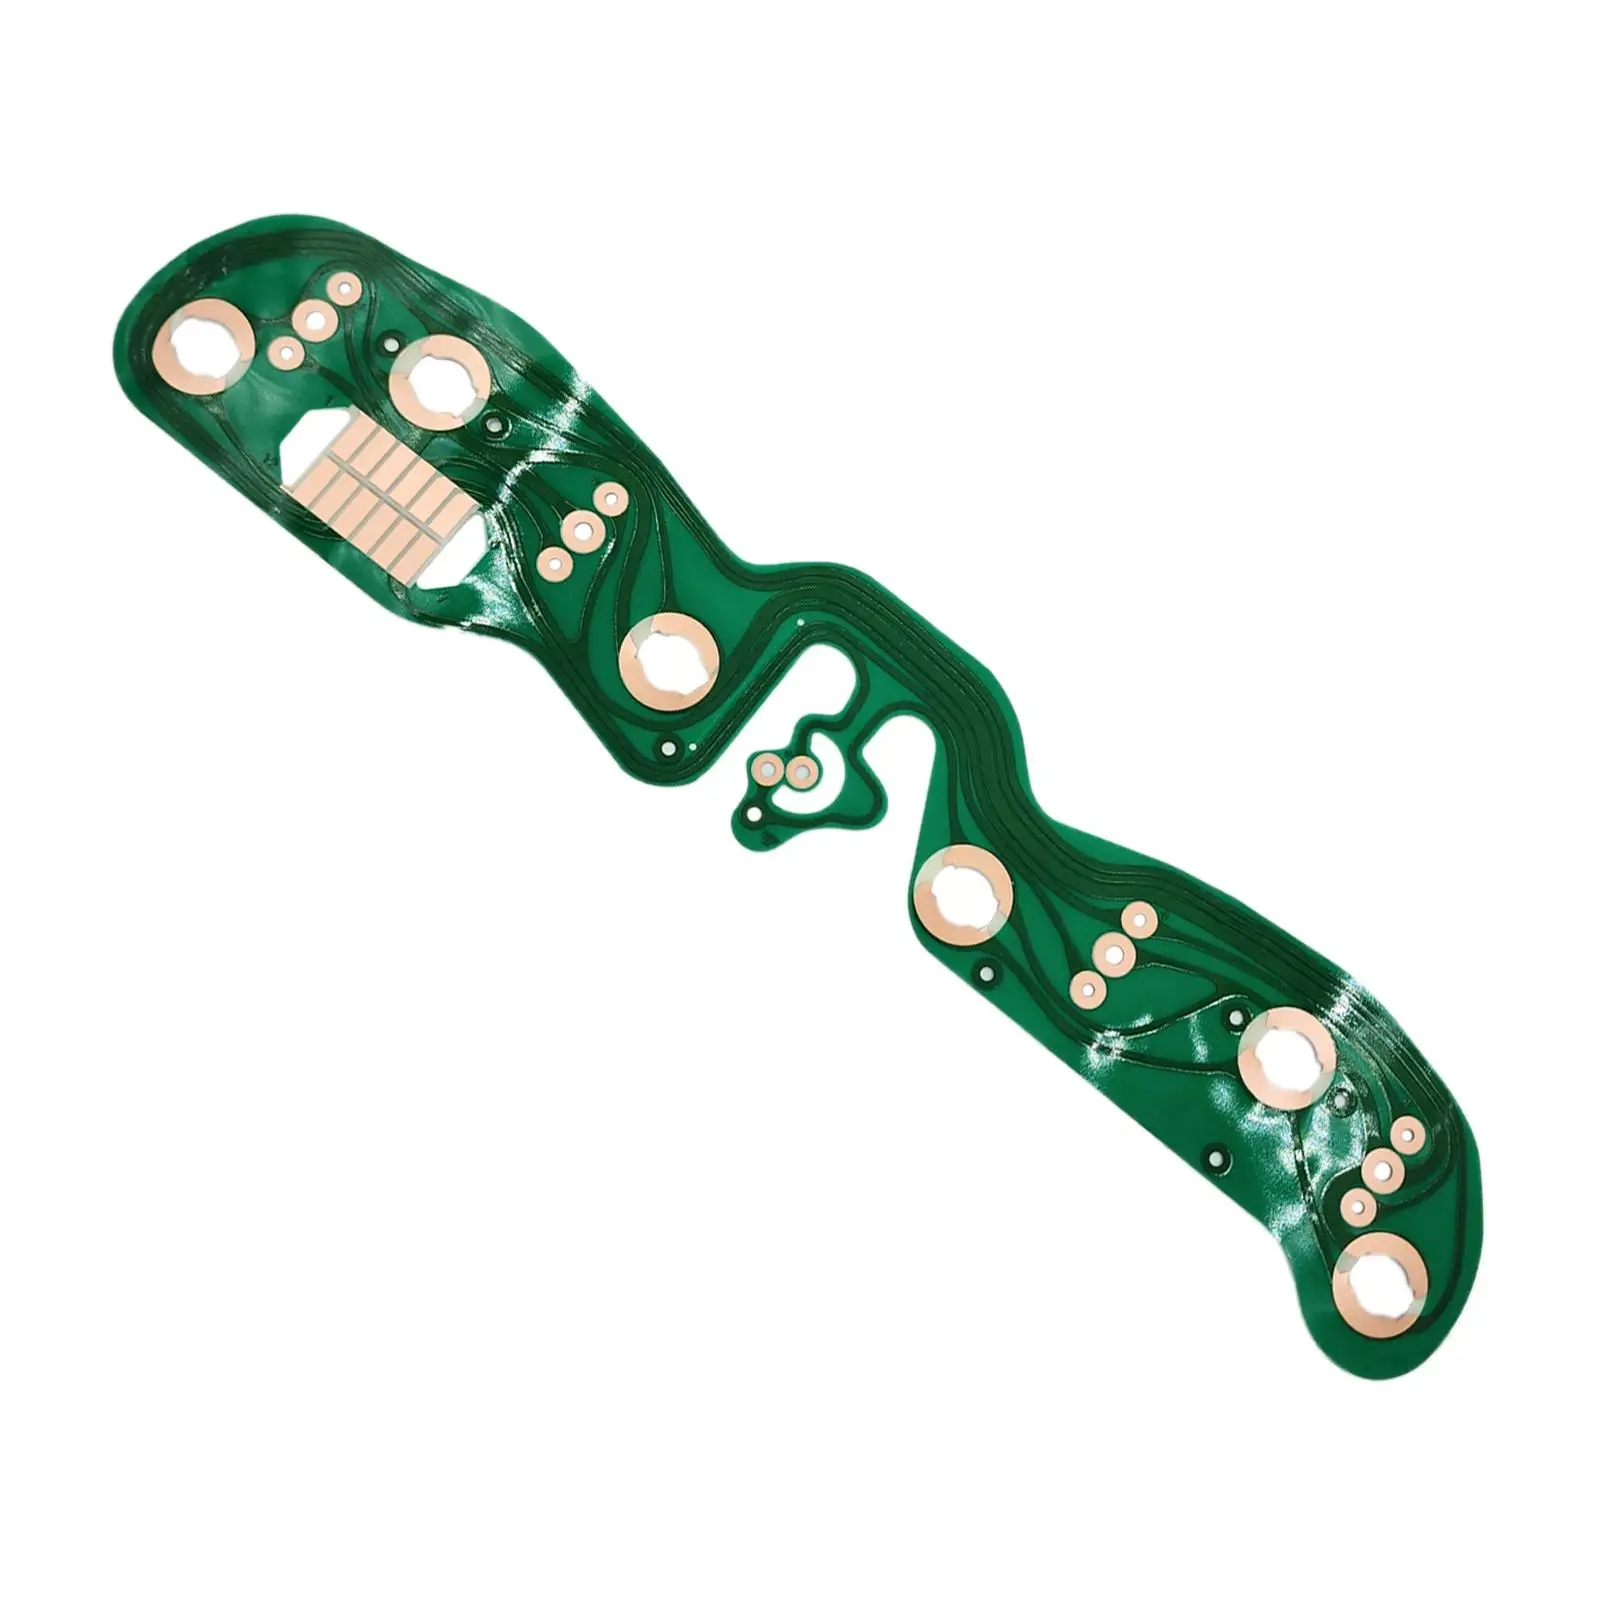 Gauges Printed Circuit Board, Panel Spare Parts Replaces Accessories Professional